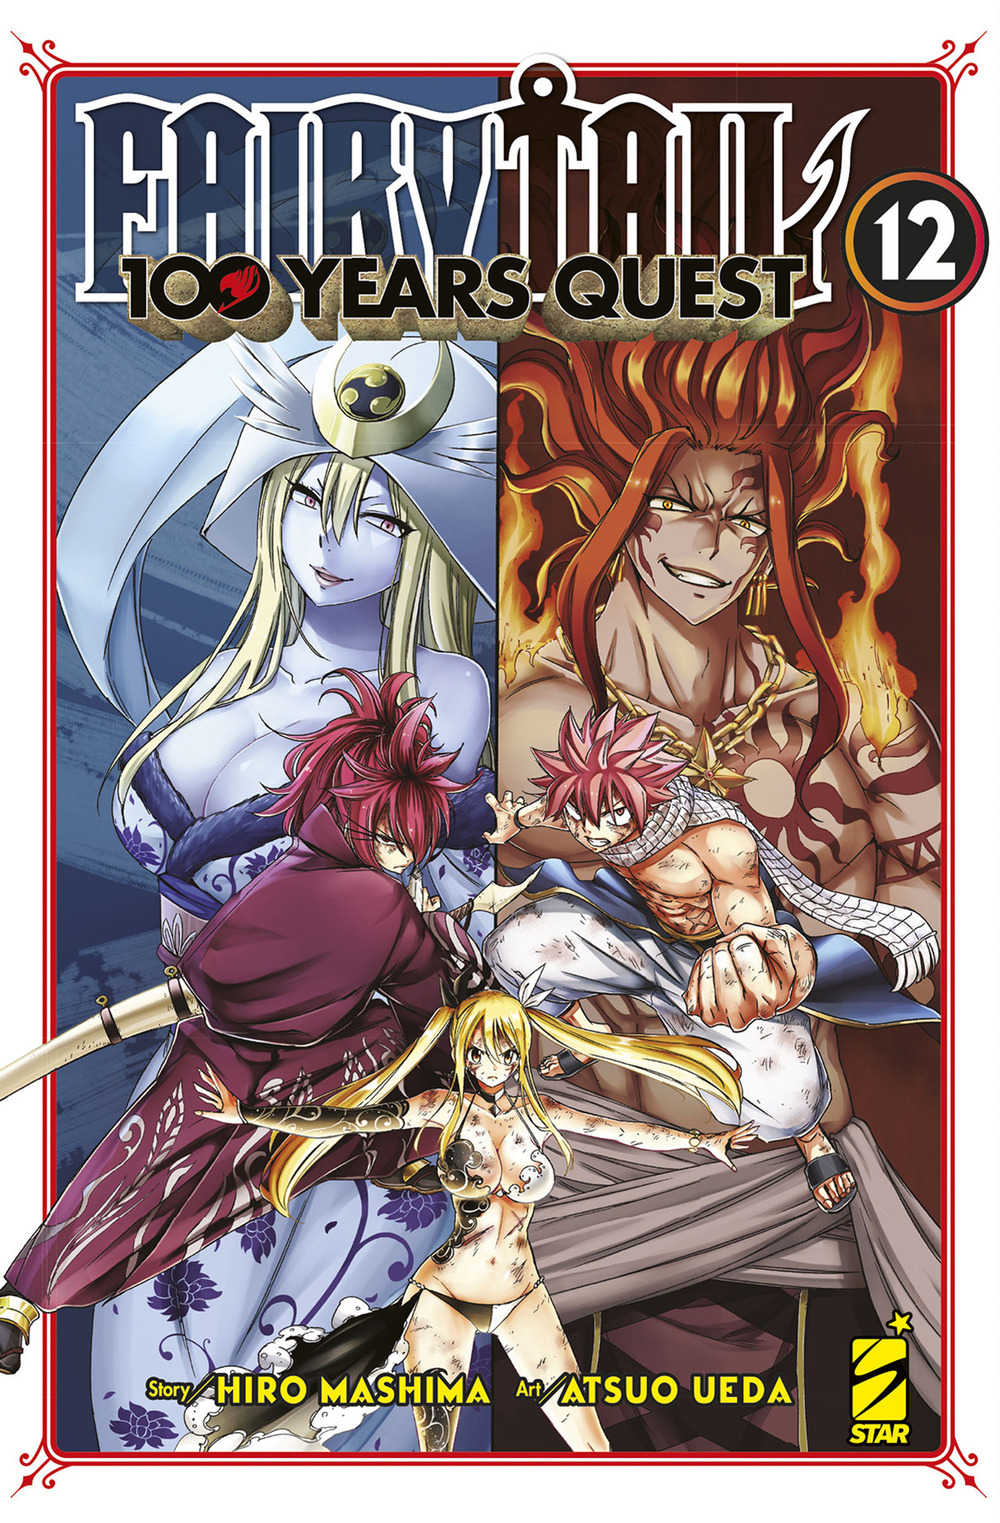 Fairy Tail. 100 years quest. Vol. 12